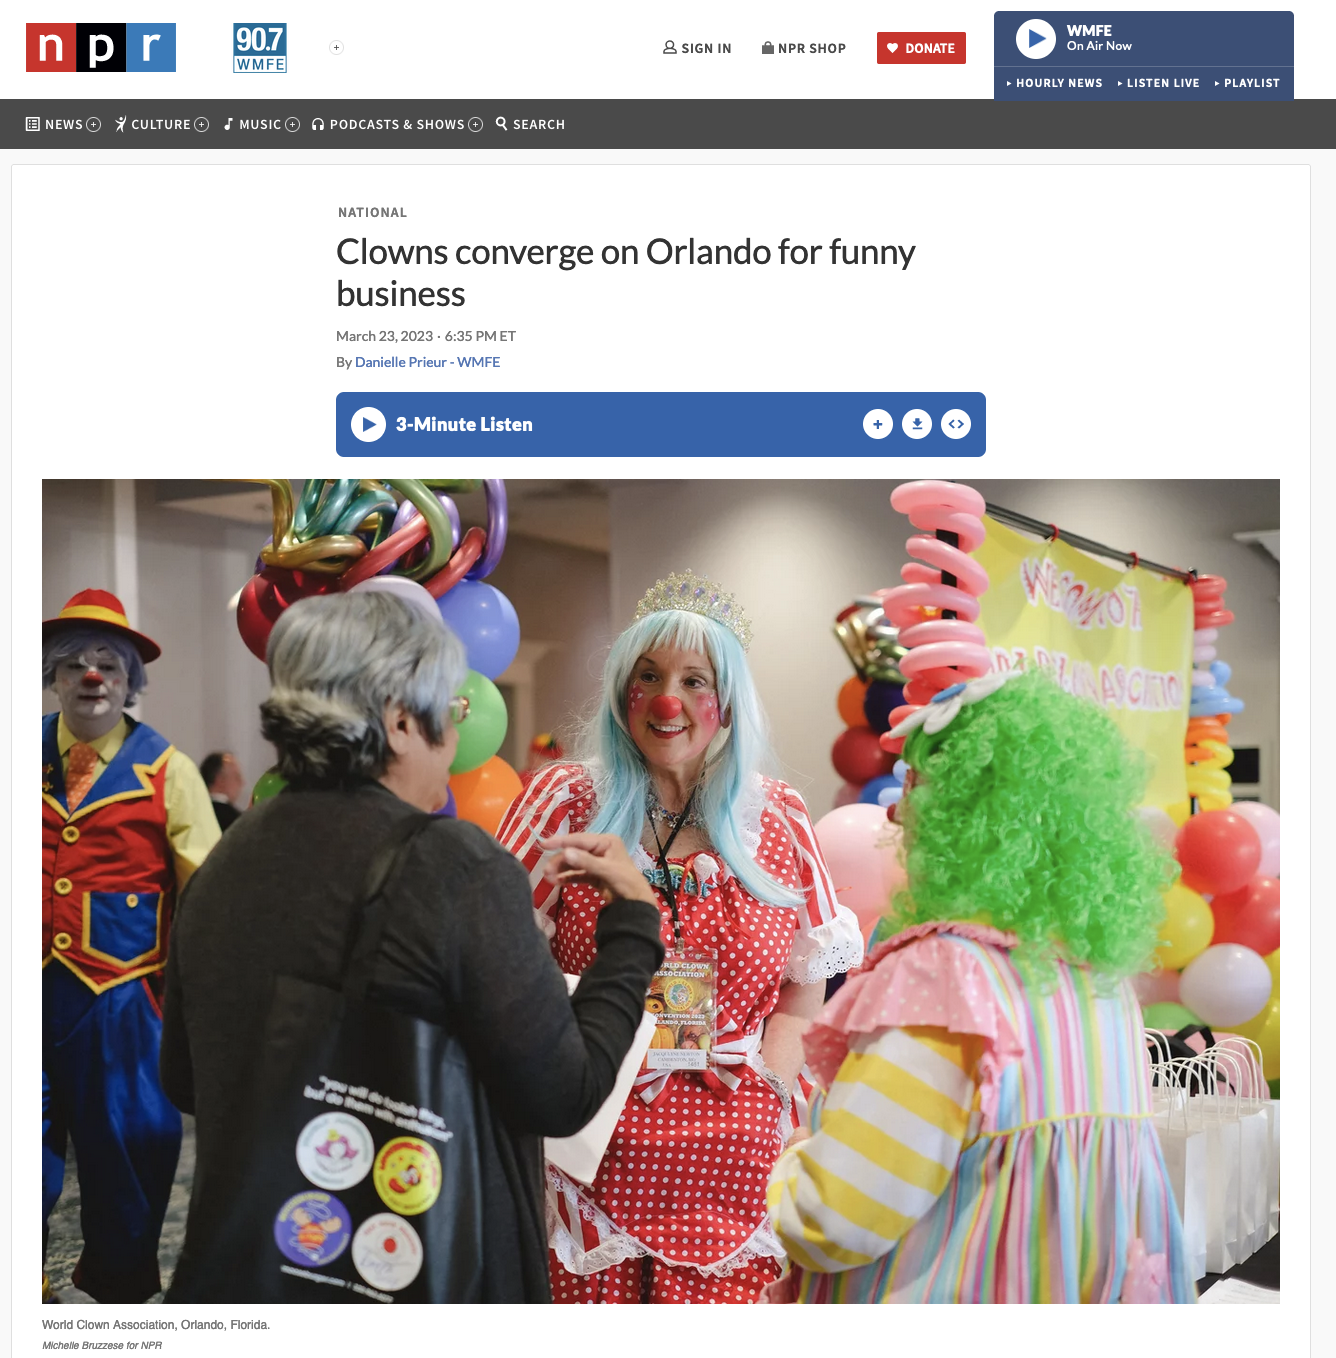 Clowns converge on Orlando for funny business 